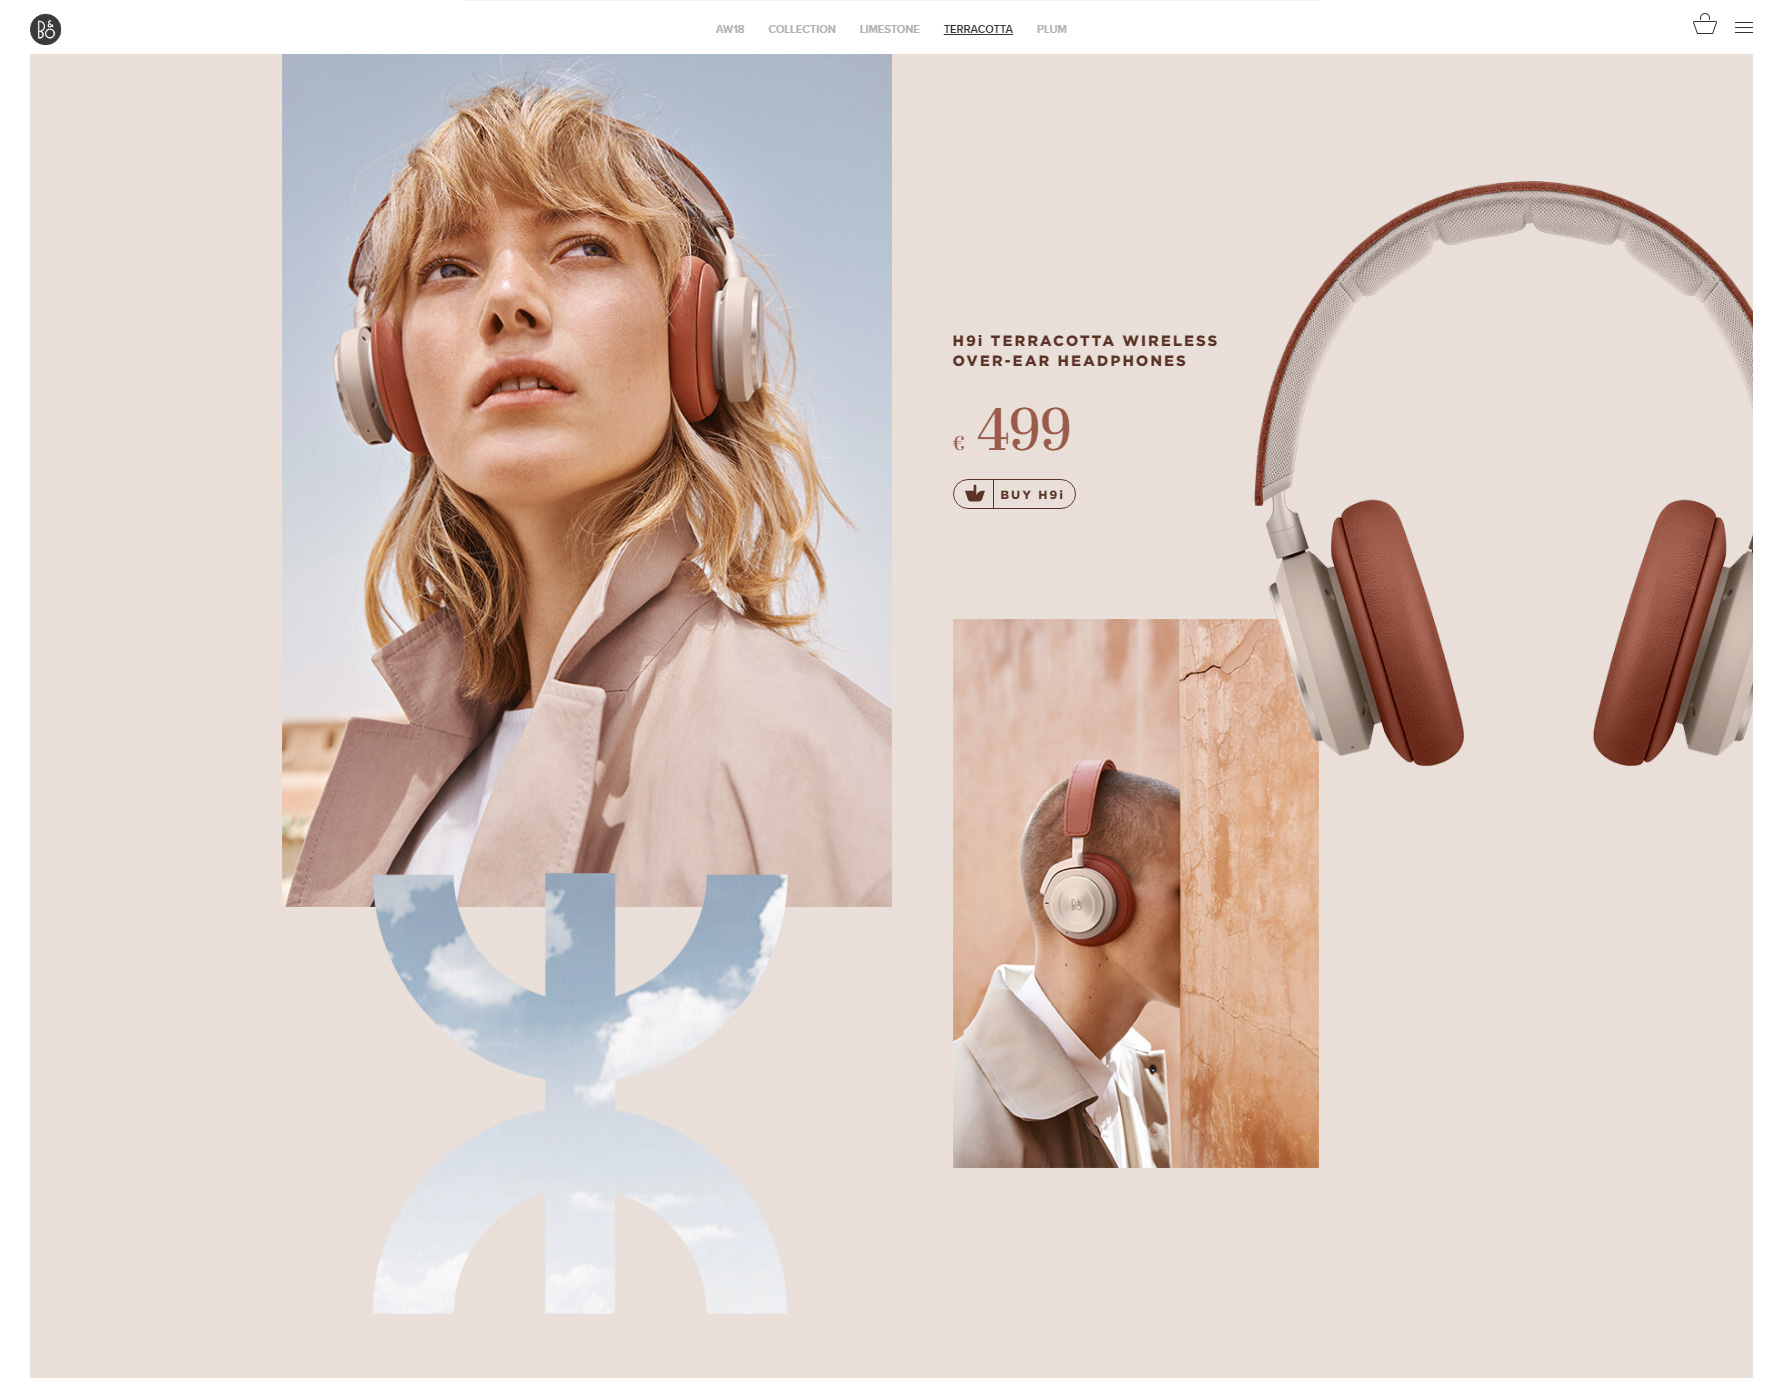 Bang & Olufsen AW18 - Website of the Day